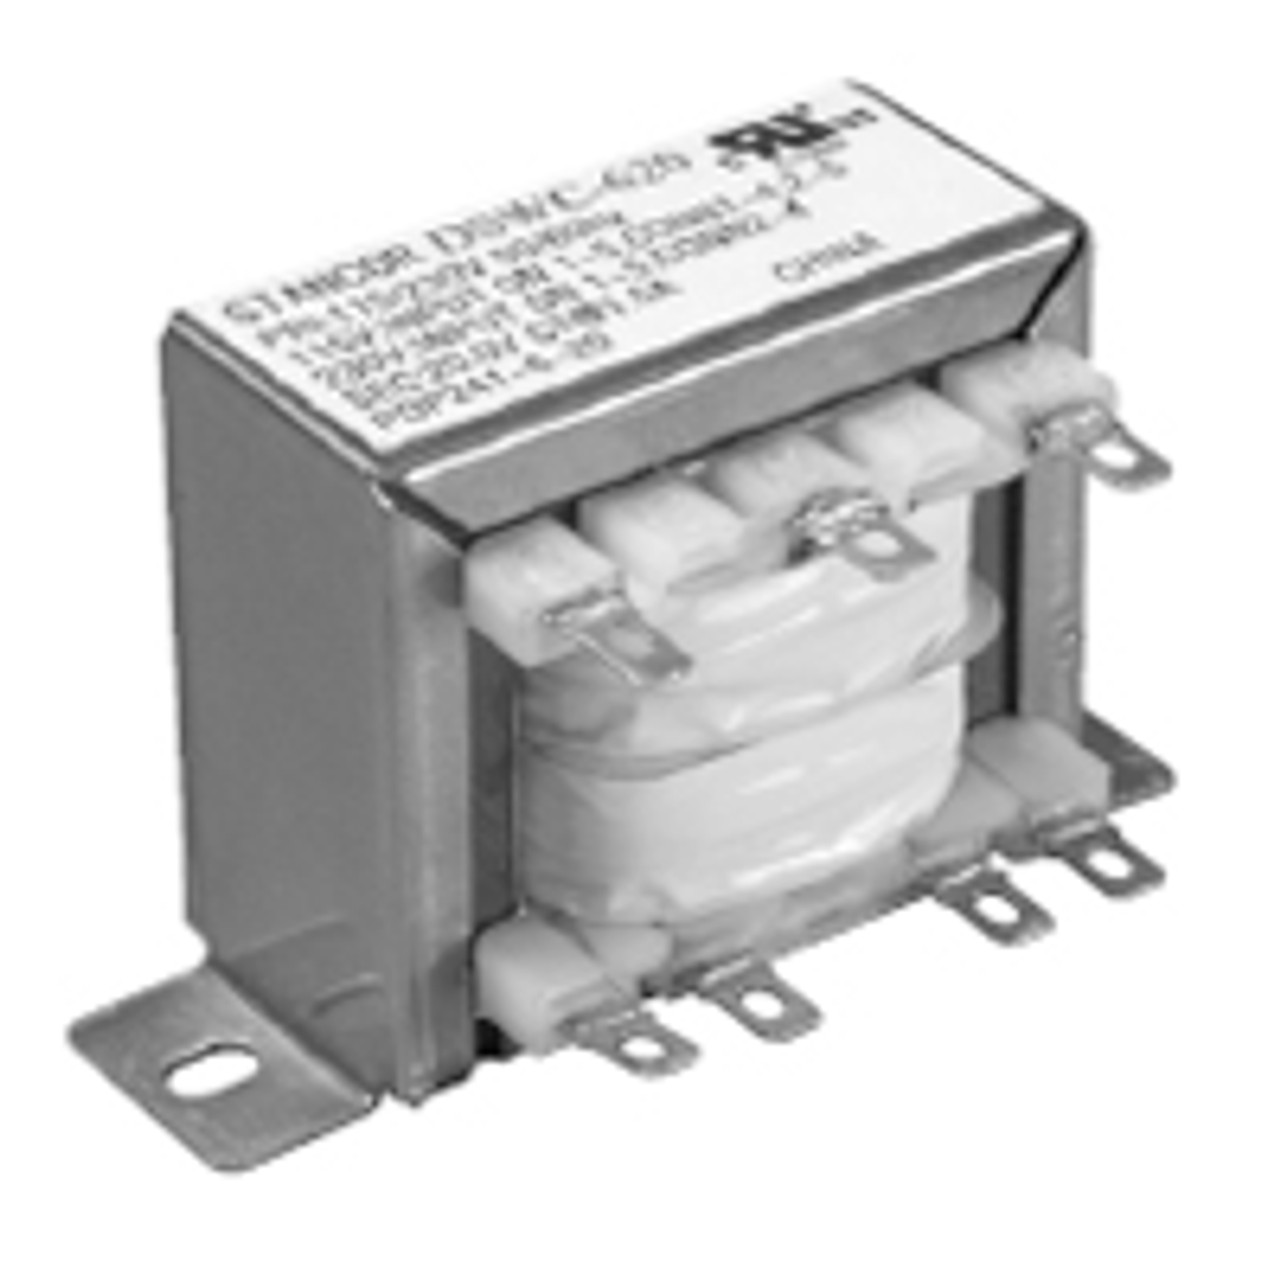 Stancor / White Rodgers DSWC-620 Chassis Mount Power Transformers